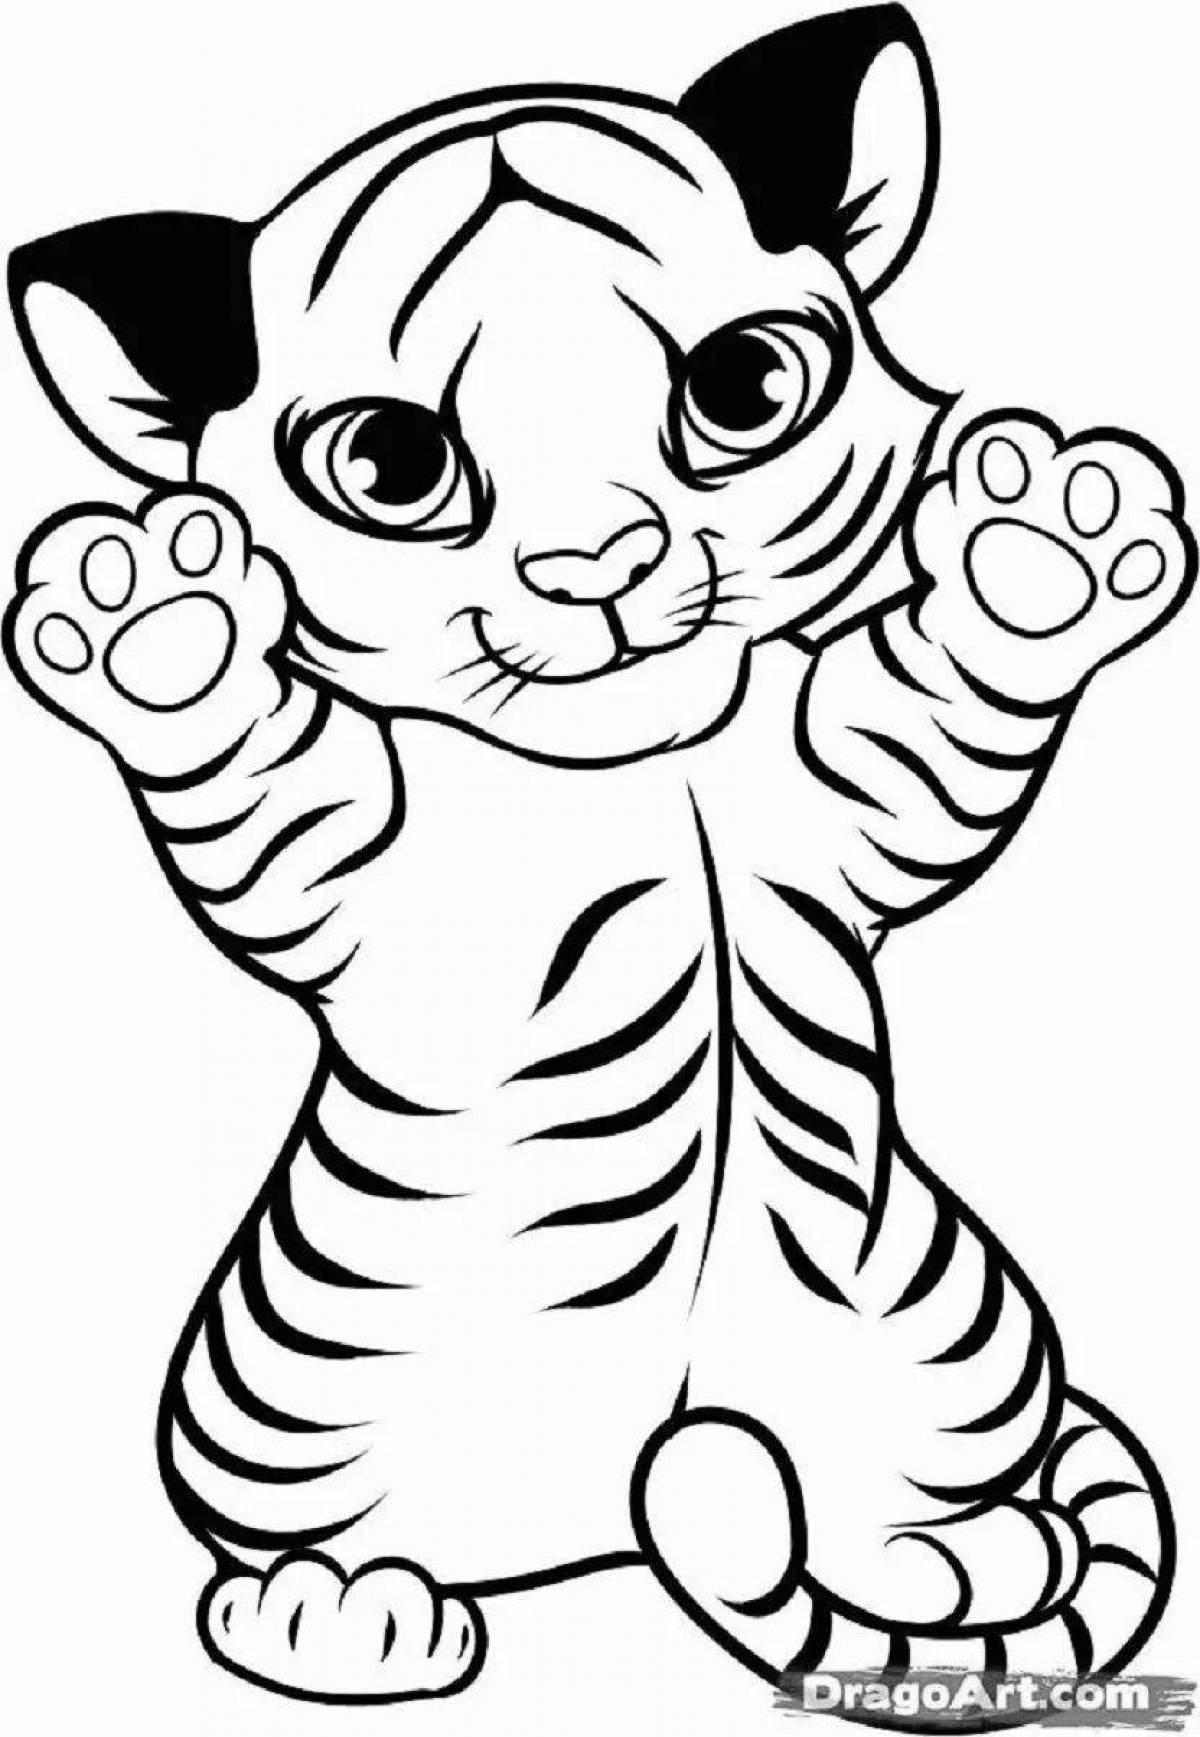 Intricate tiger coloring page for kids